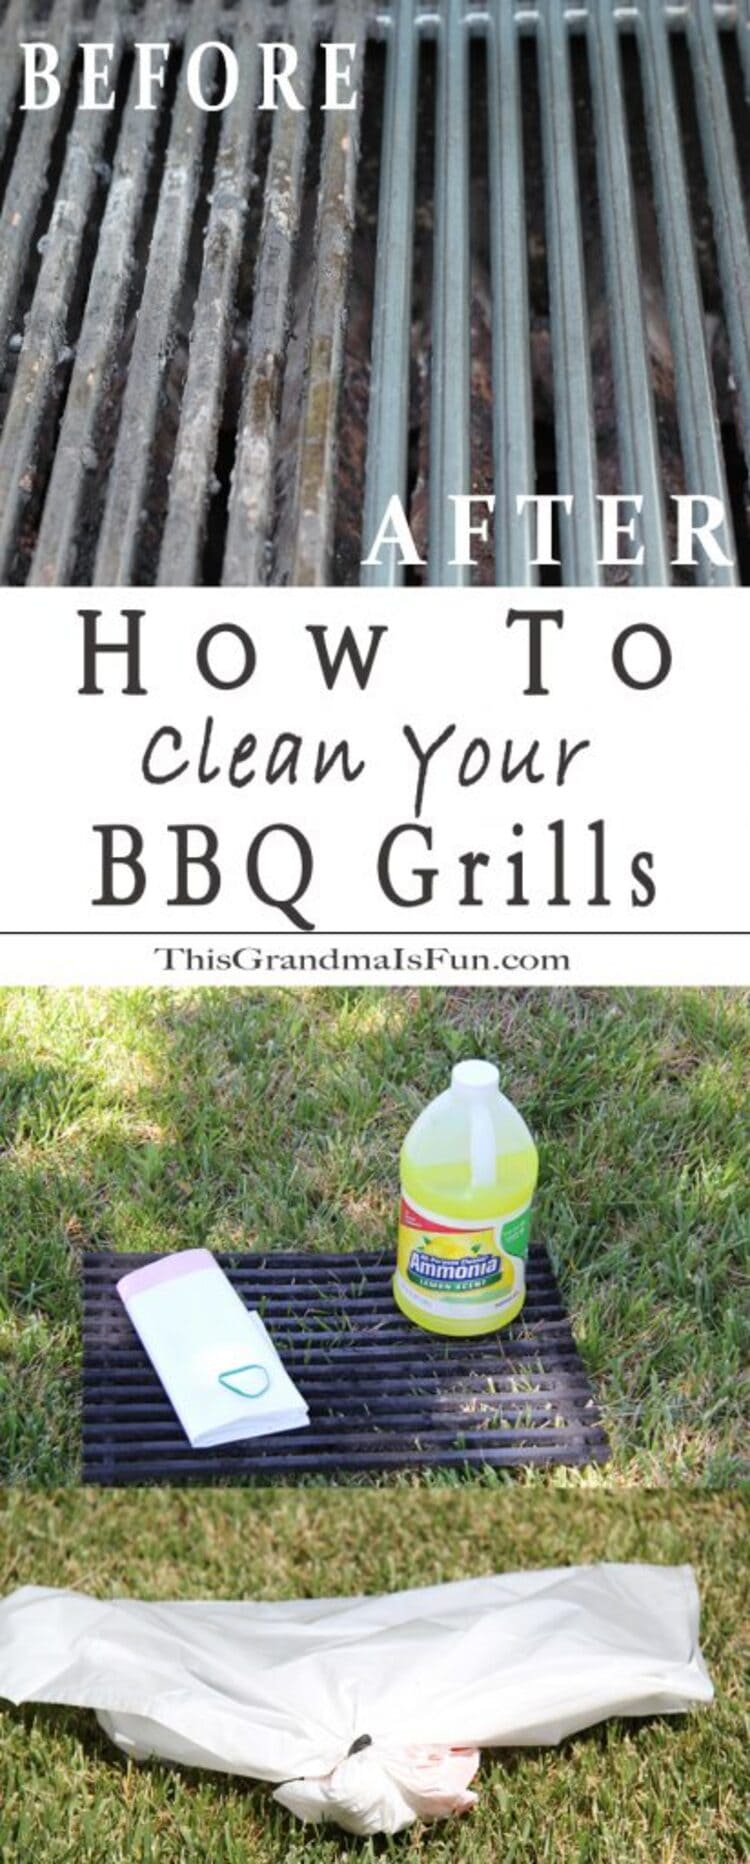 https://www.thisgrandmaisfun.com/wp-content/uploads/2021/09/How-To-Clean-Your-BBQ-Grill-412x1024-1.jpg